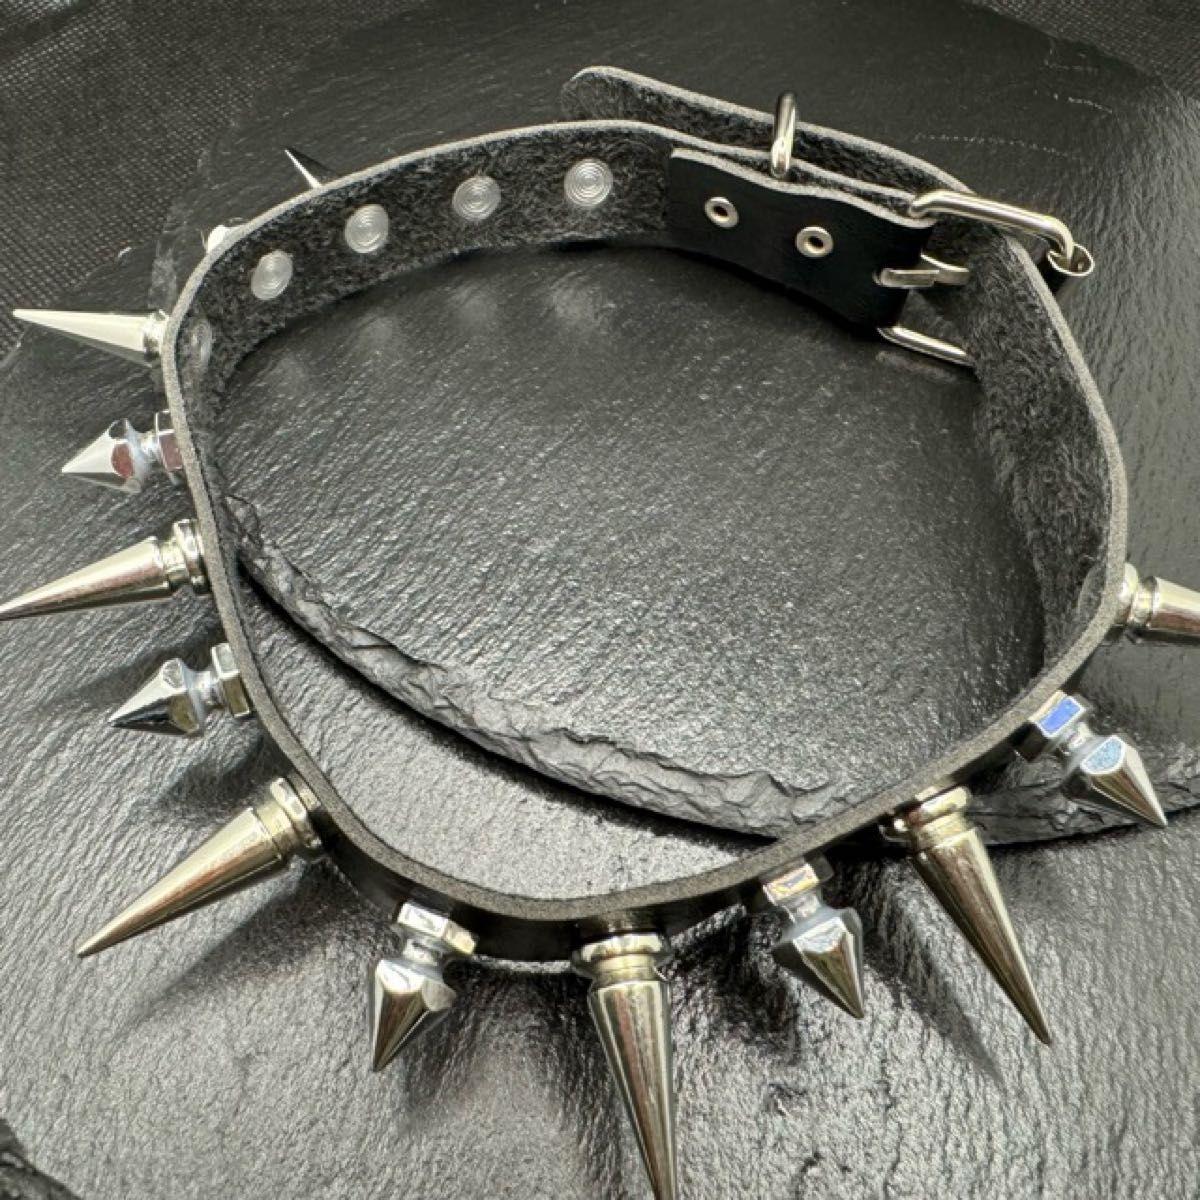  neck wheel flat tire accessory choker punk fashion ground . Gothic and Lolita studs cosplay .. men's lady's sick .togetoge